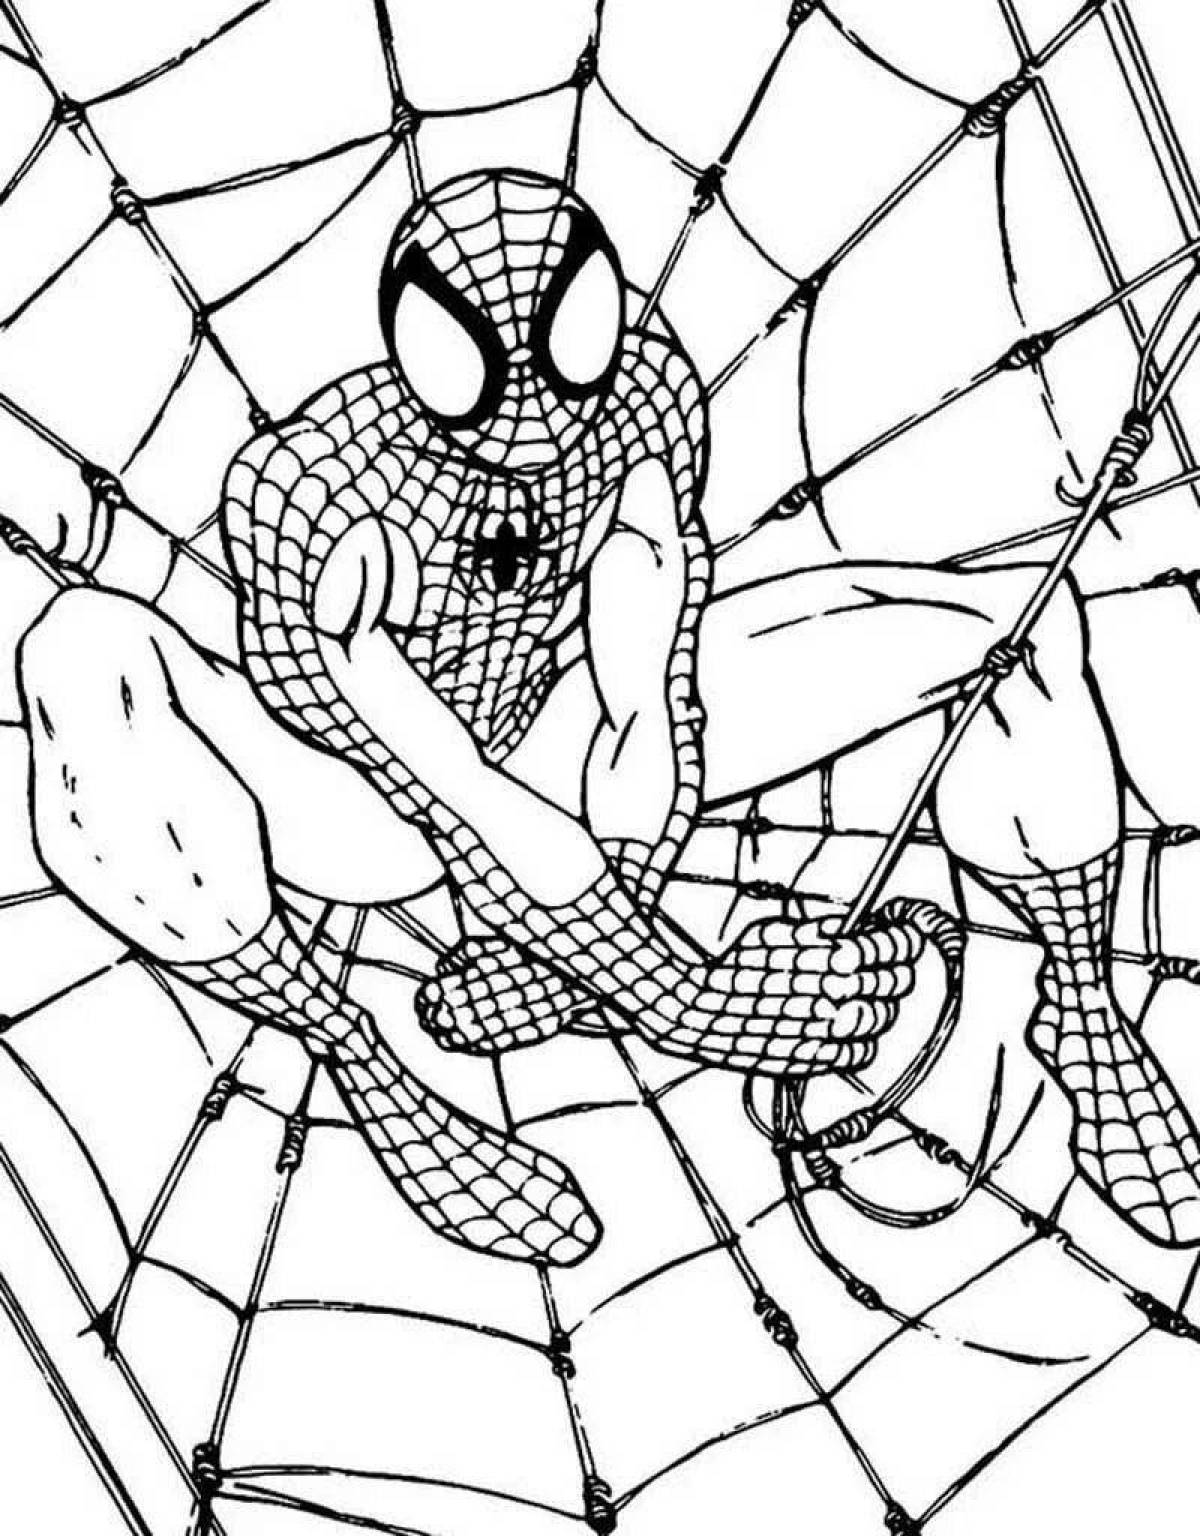 Superb man spider coloring page